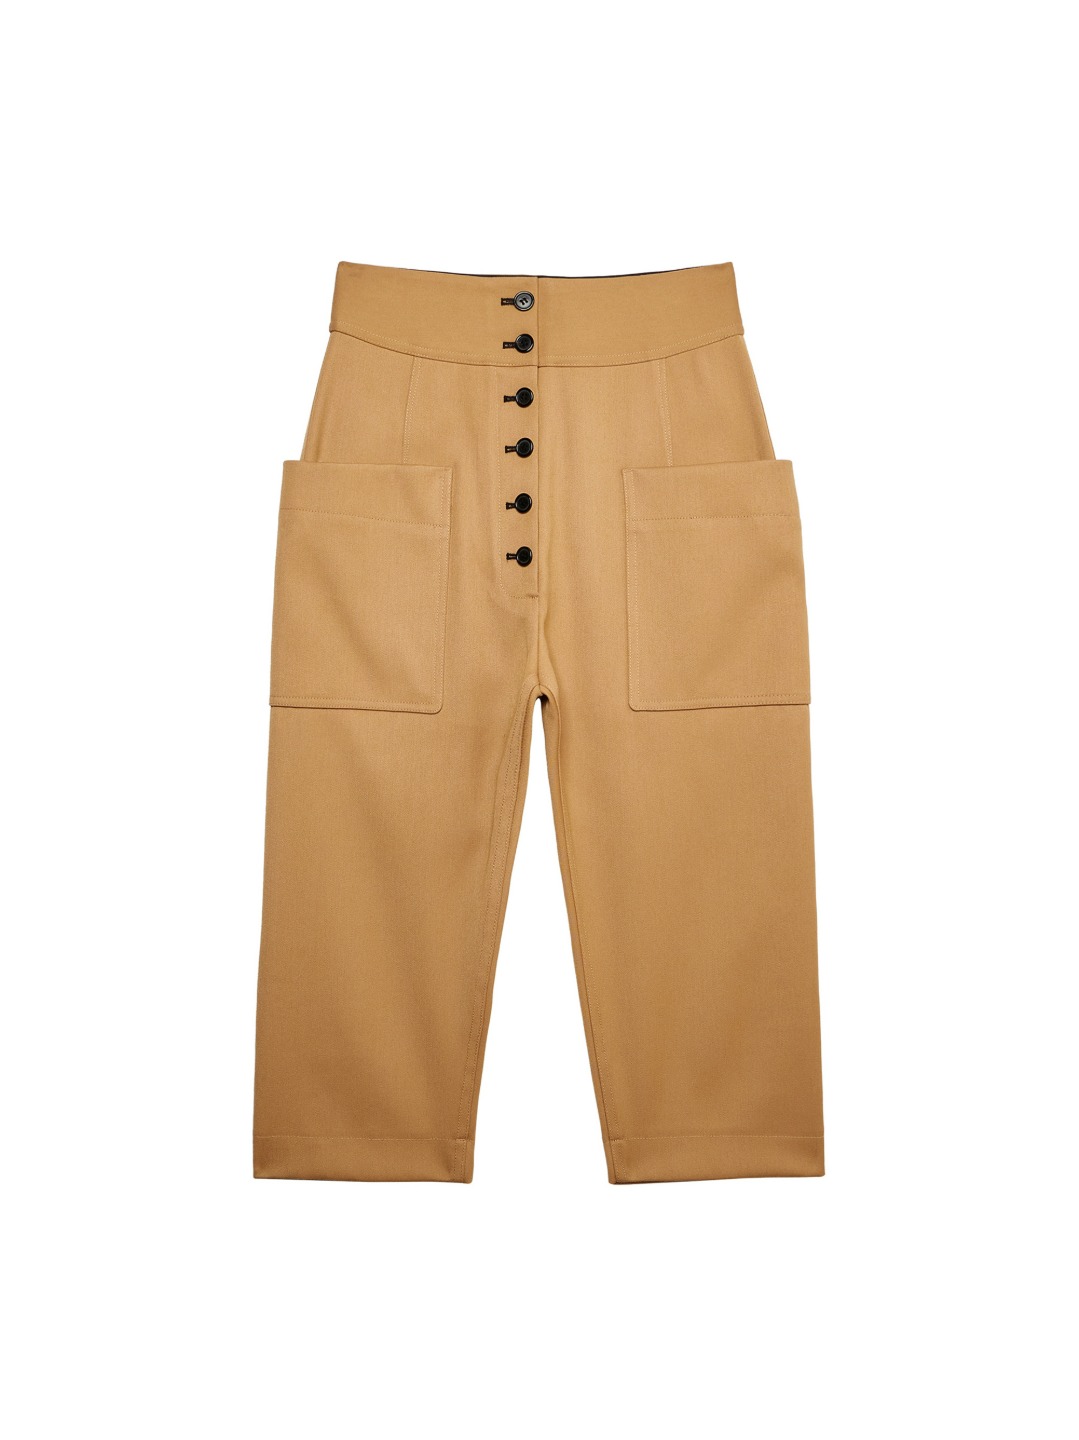 155. Button-up Cropped Baggy Pants / 버튼-업 크롭 배기 팬츠